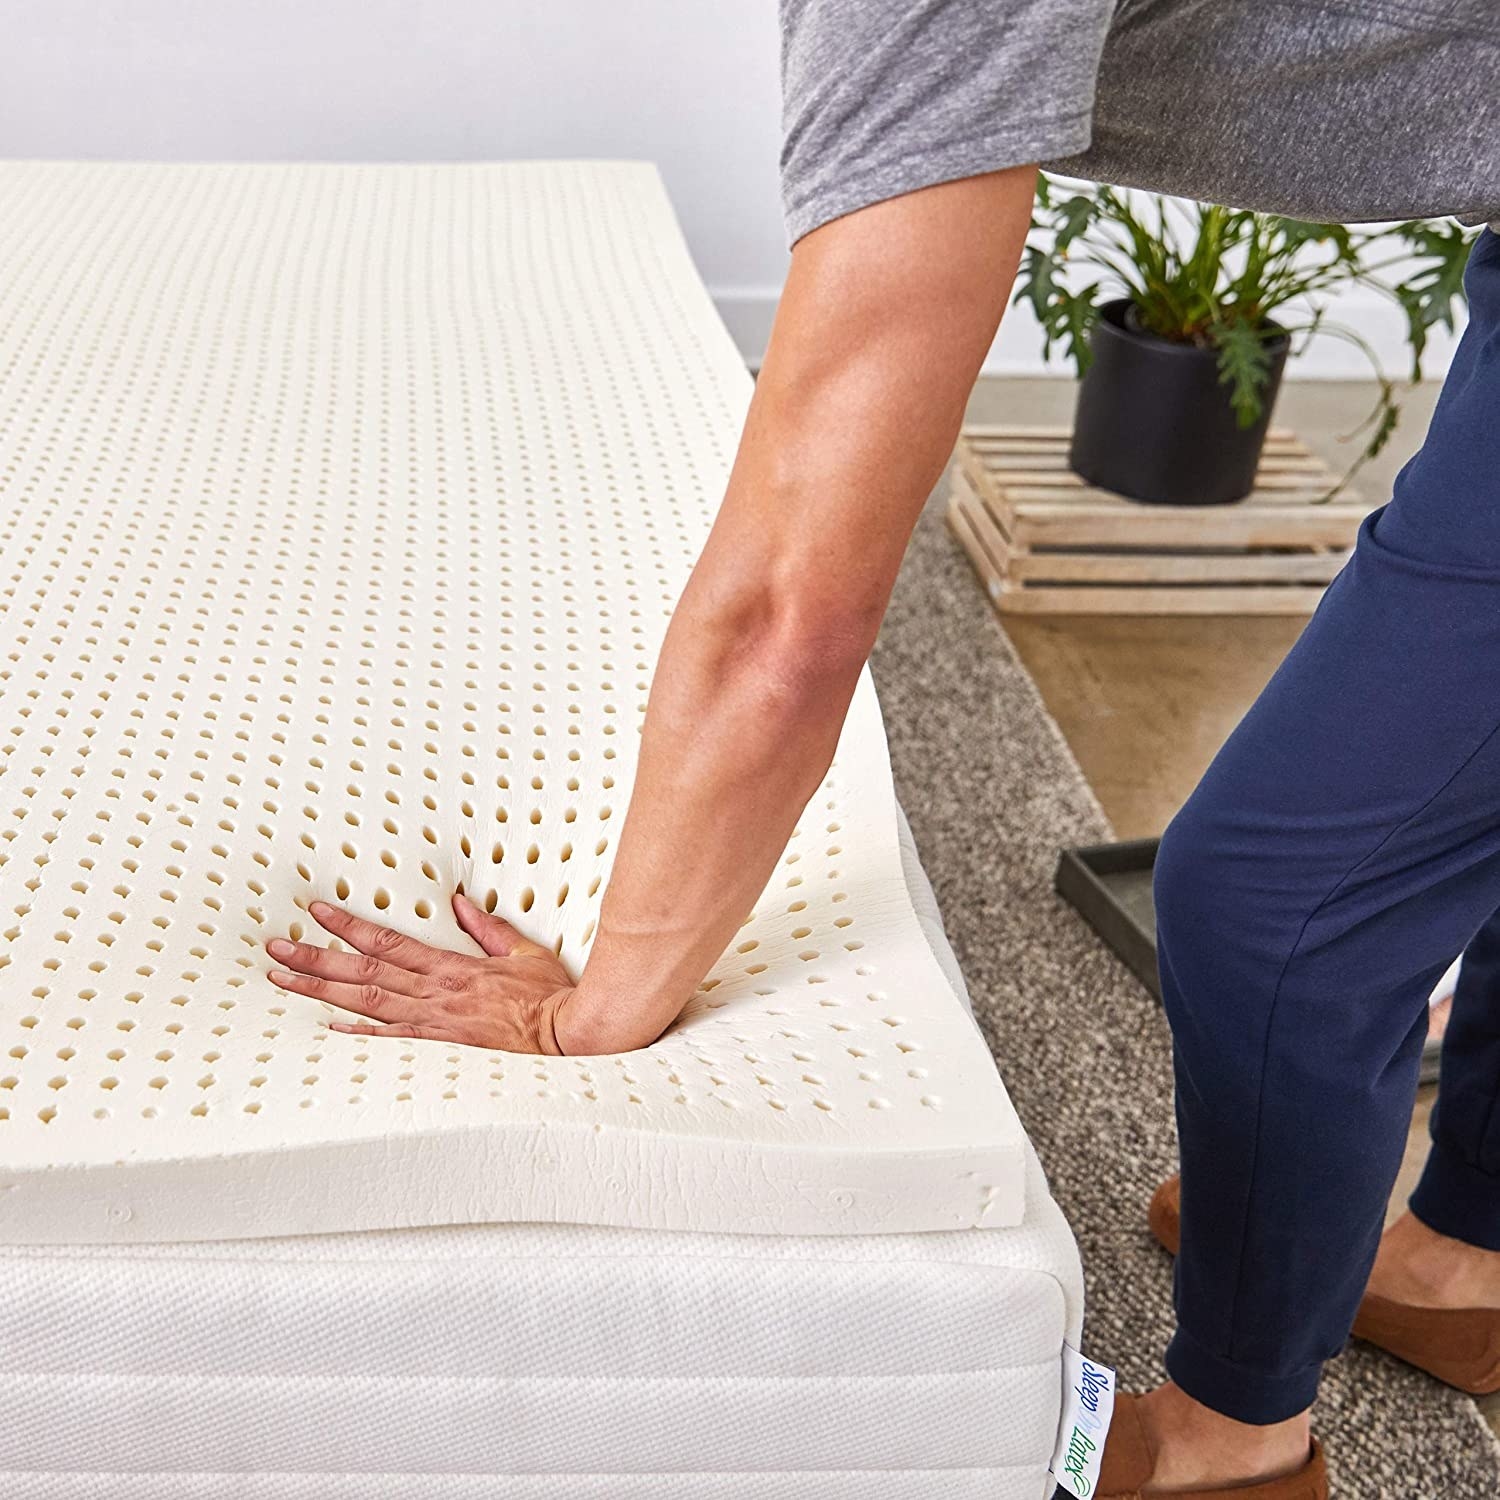 Best mattress toppers on : Protect your bed with these mattress pads